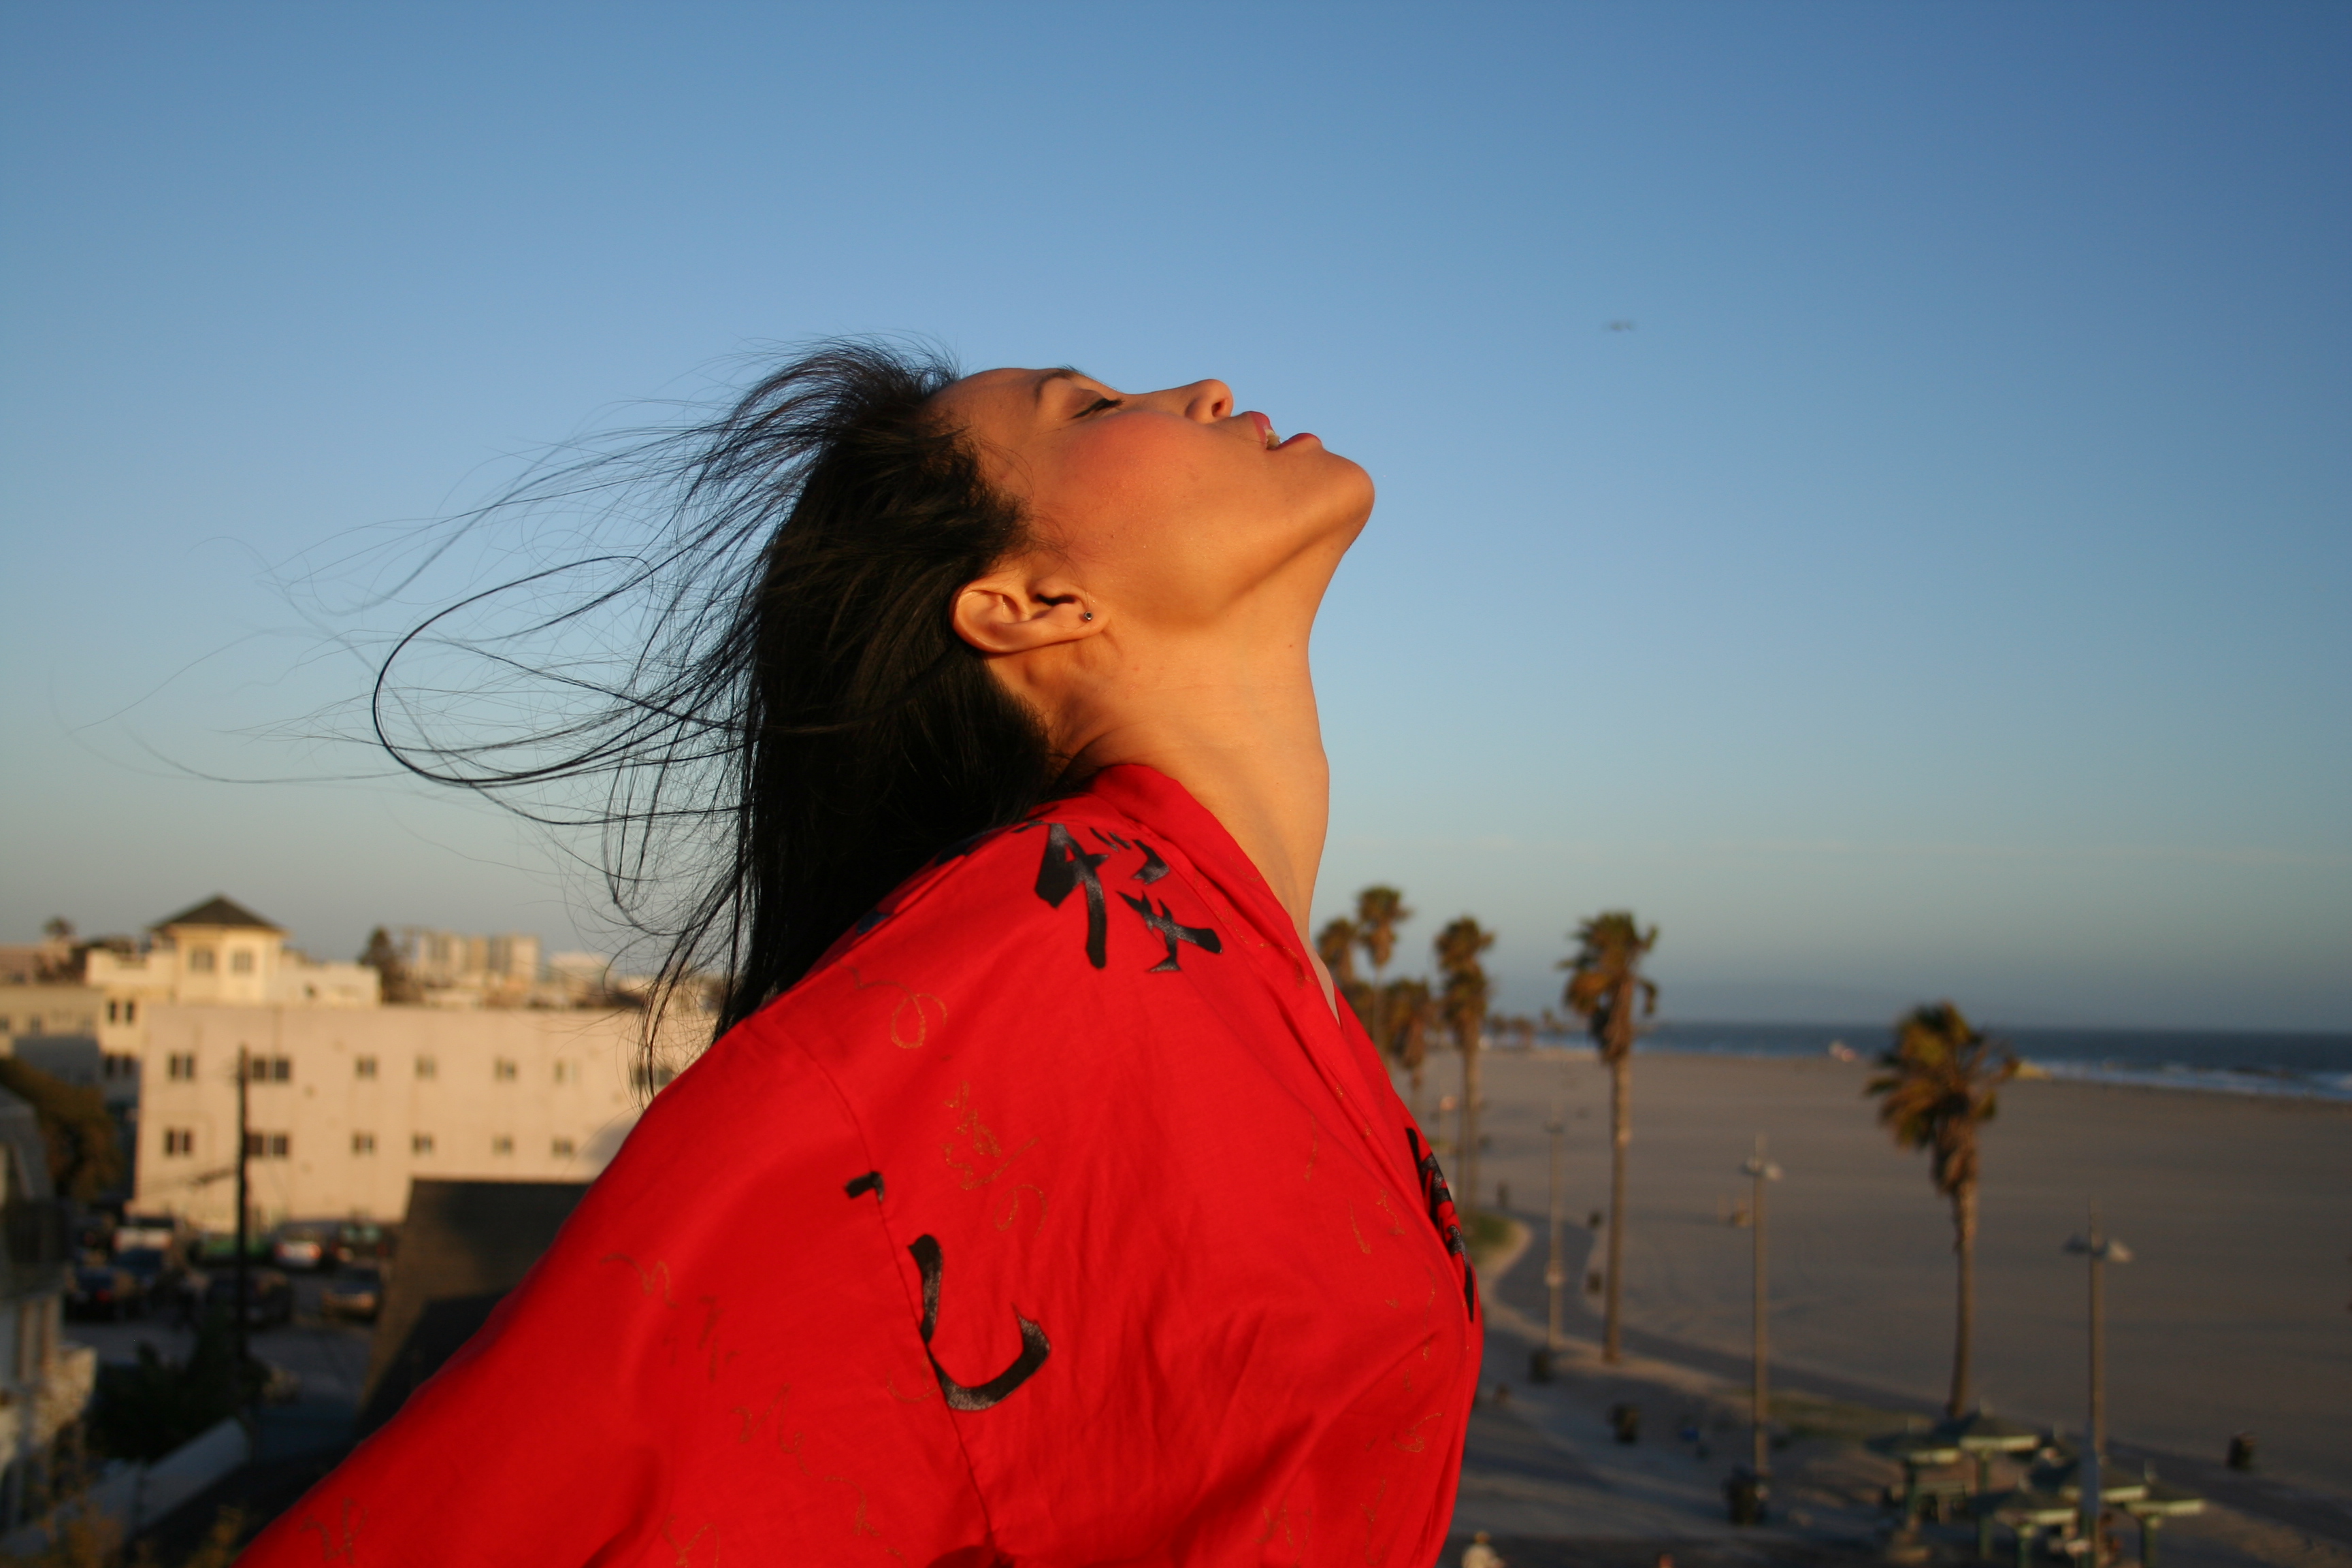 Hollywood Sunset freedom in the wind rooftop geisha Actress Lai Peng Chan